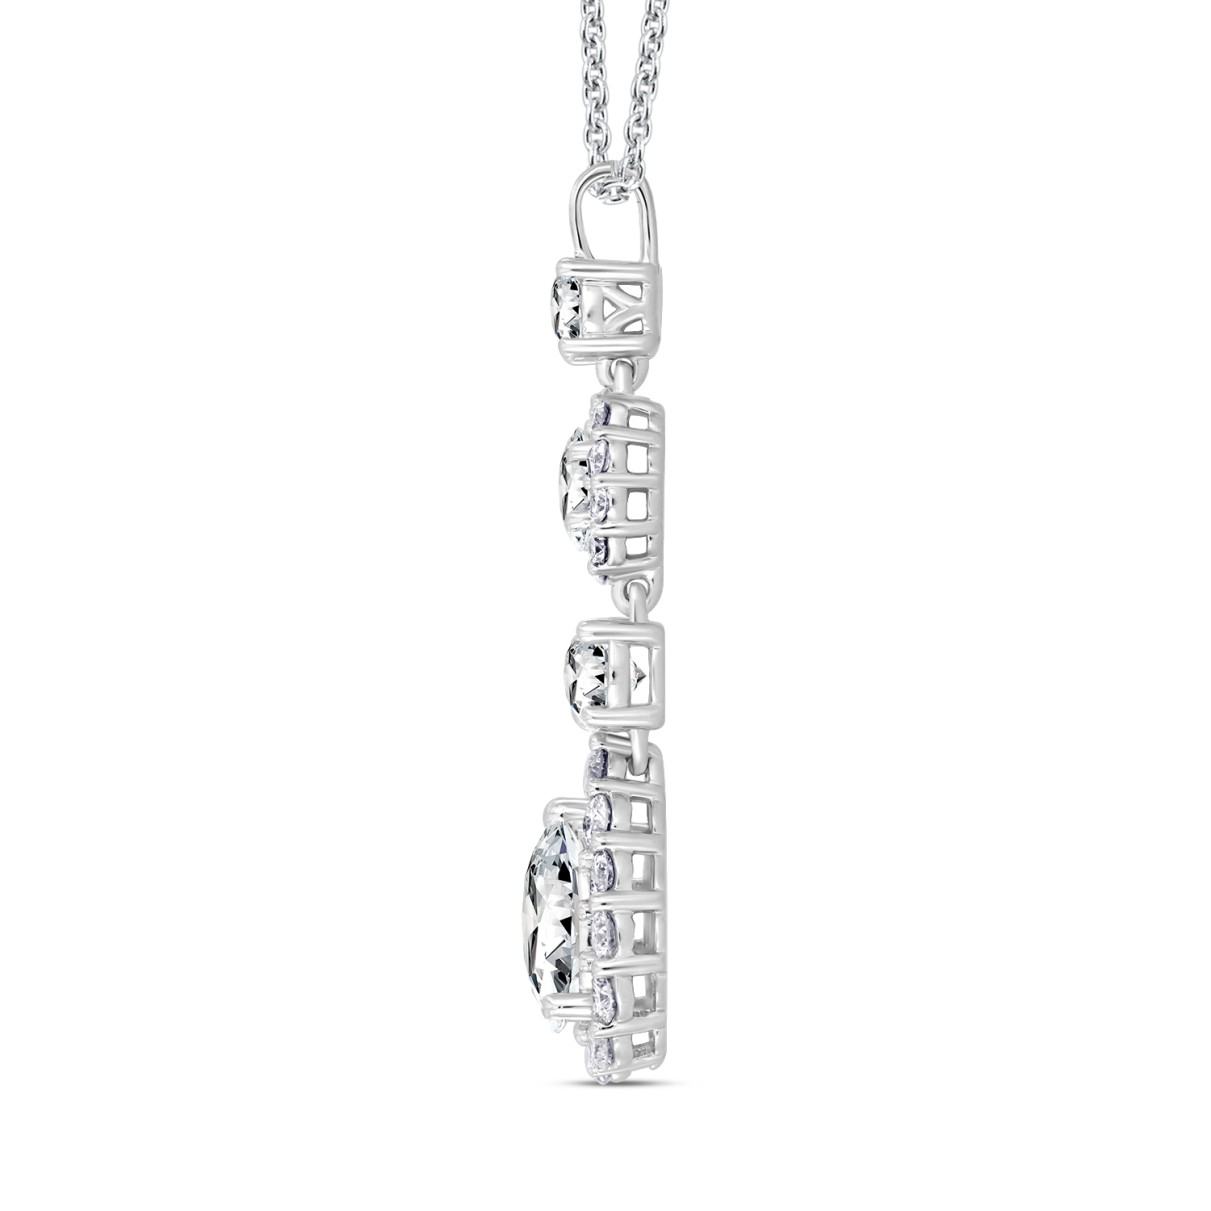 LADIES PENDANT WITH CHAIN 2CT PEAR/ROUND/OVAL DIAMOND 14K WHITE GOLD